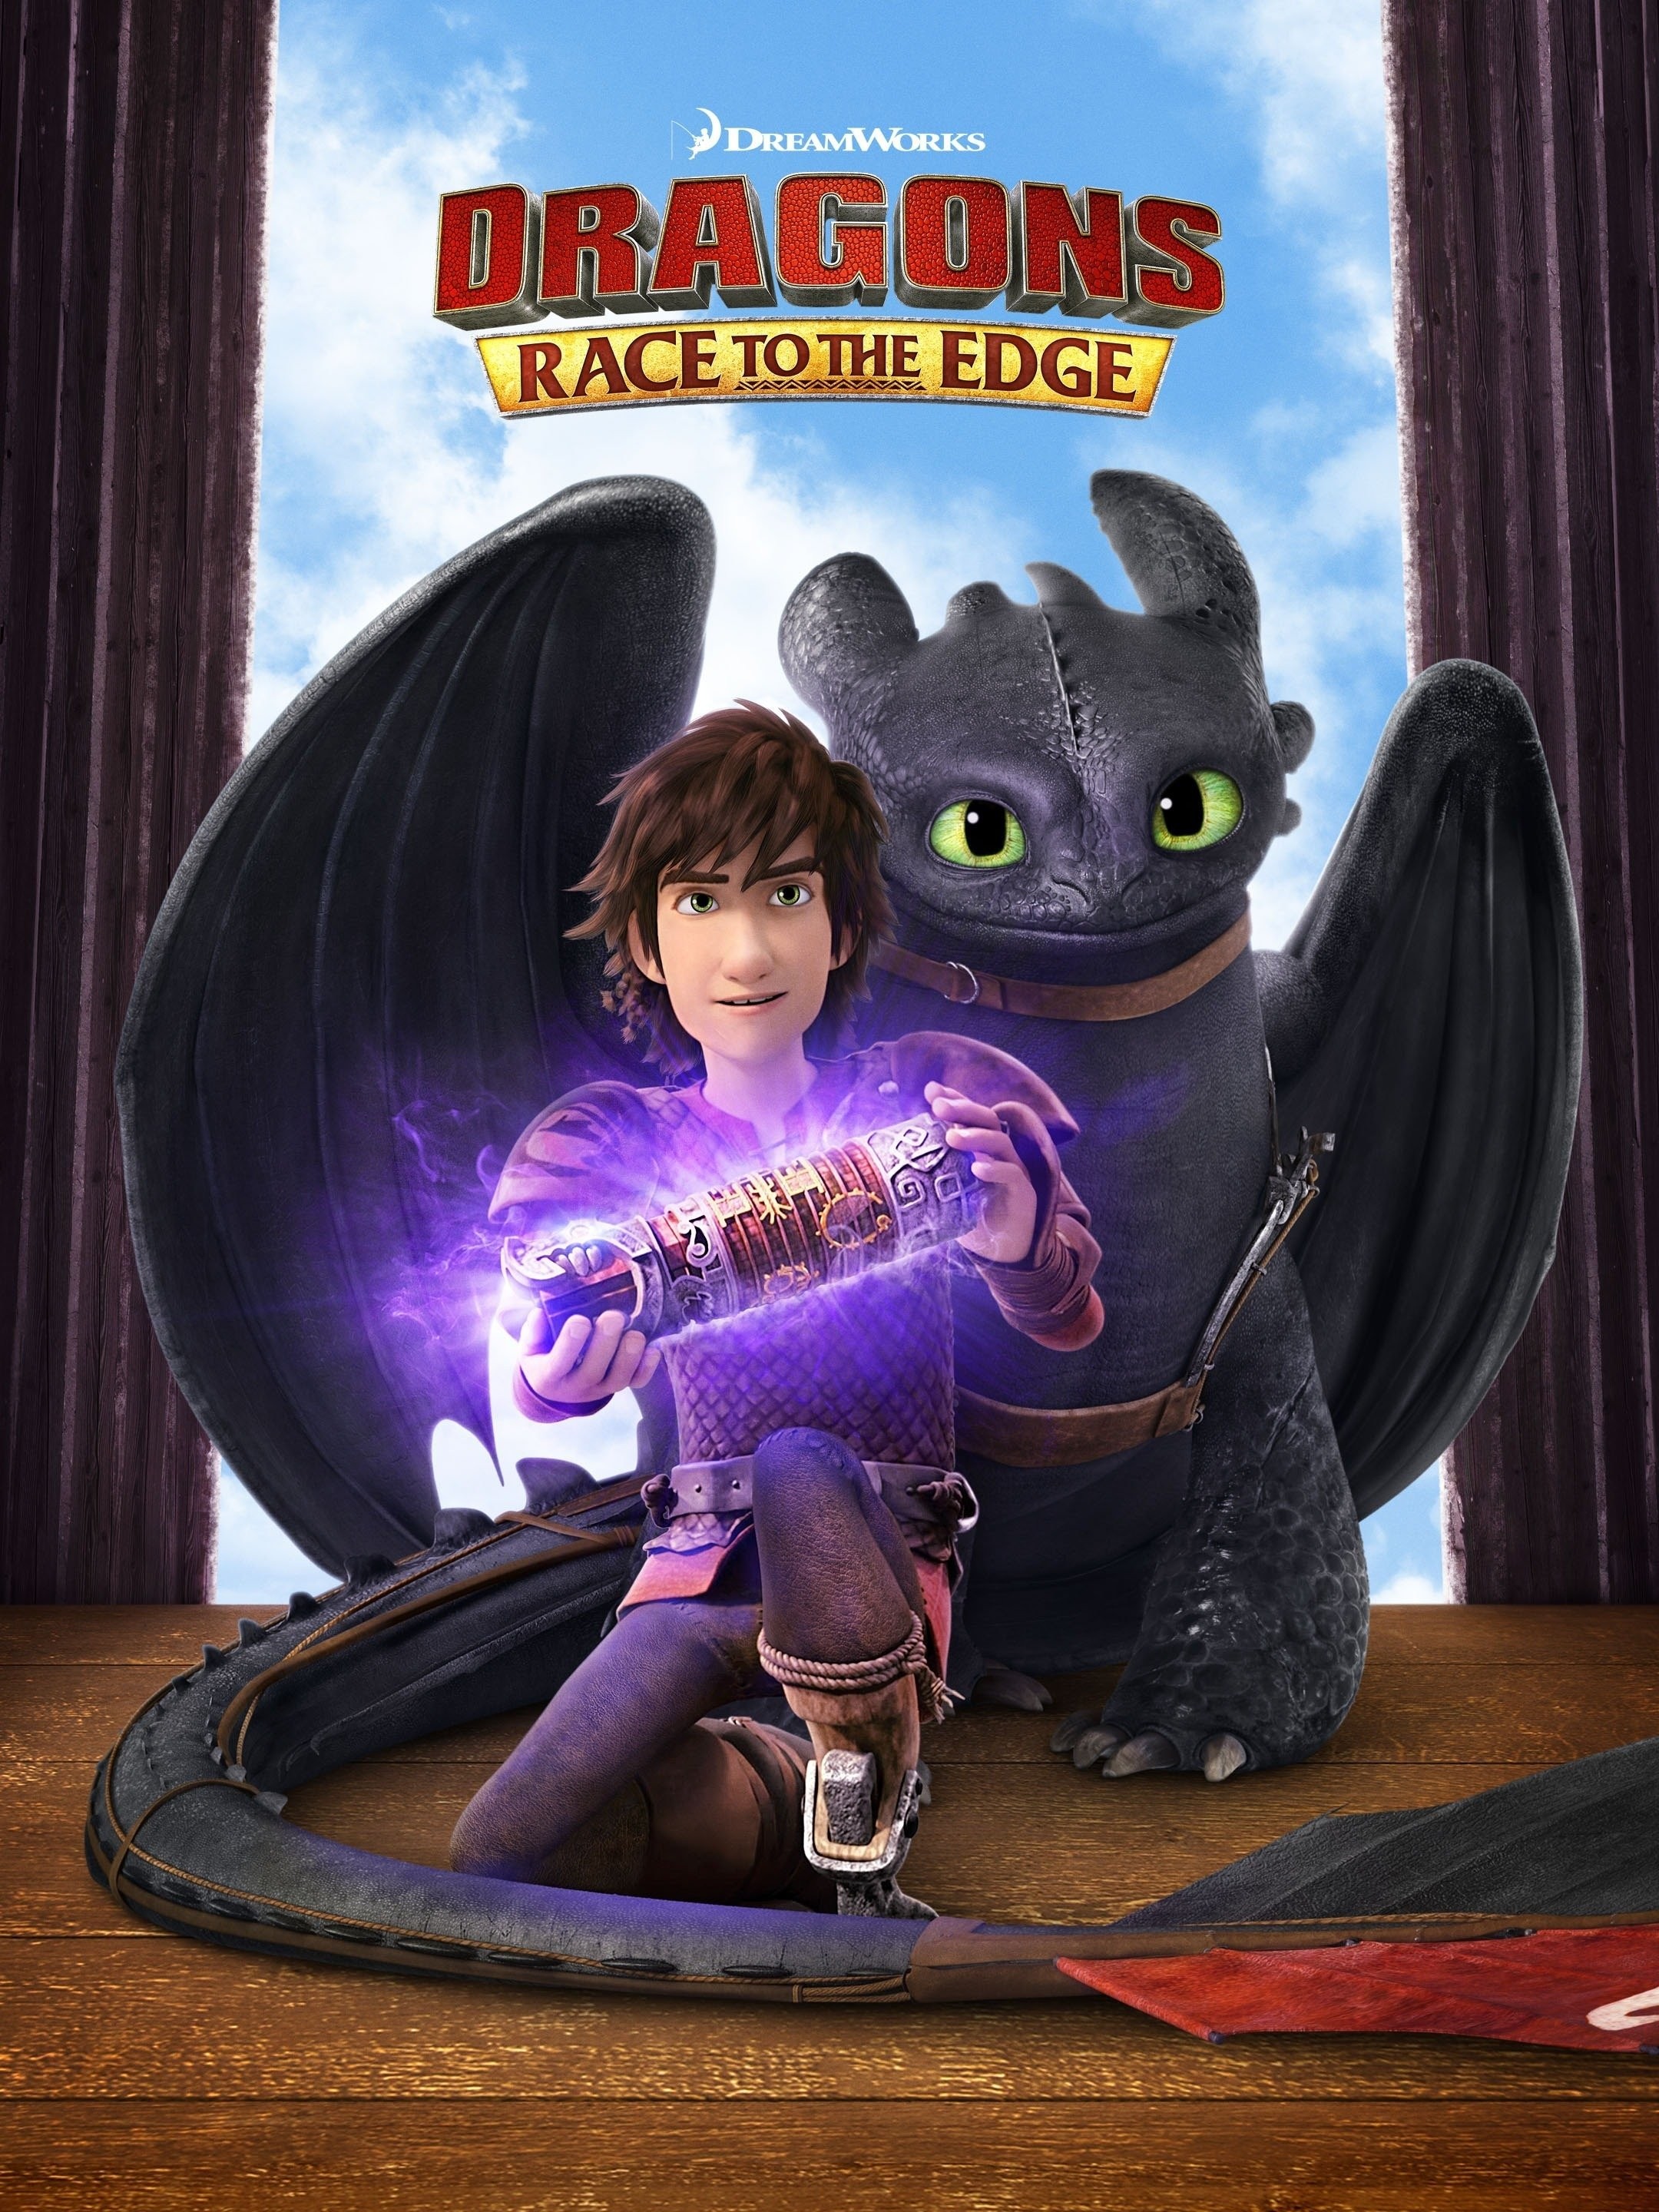 Dragons: Race to the Edge Won't be Back for Season 7 - What's on Netflix